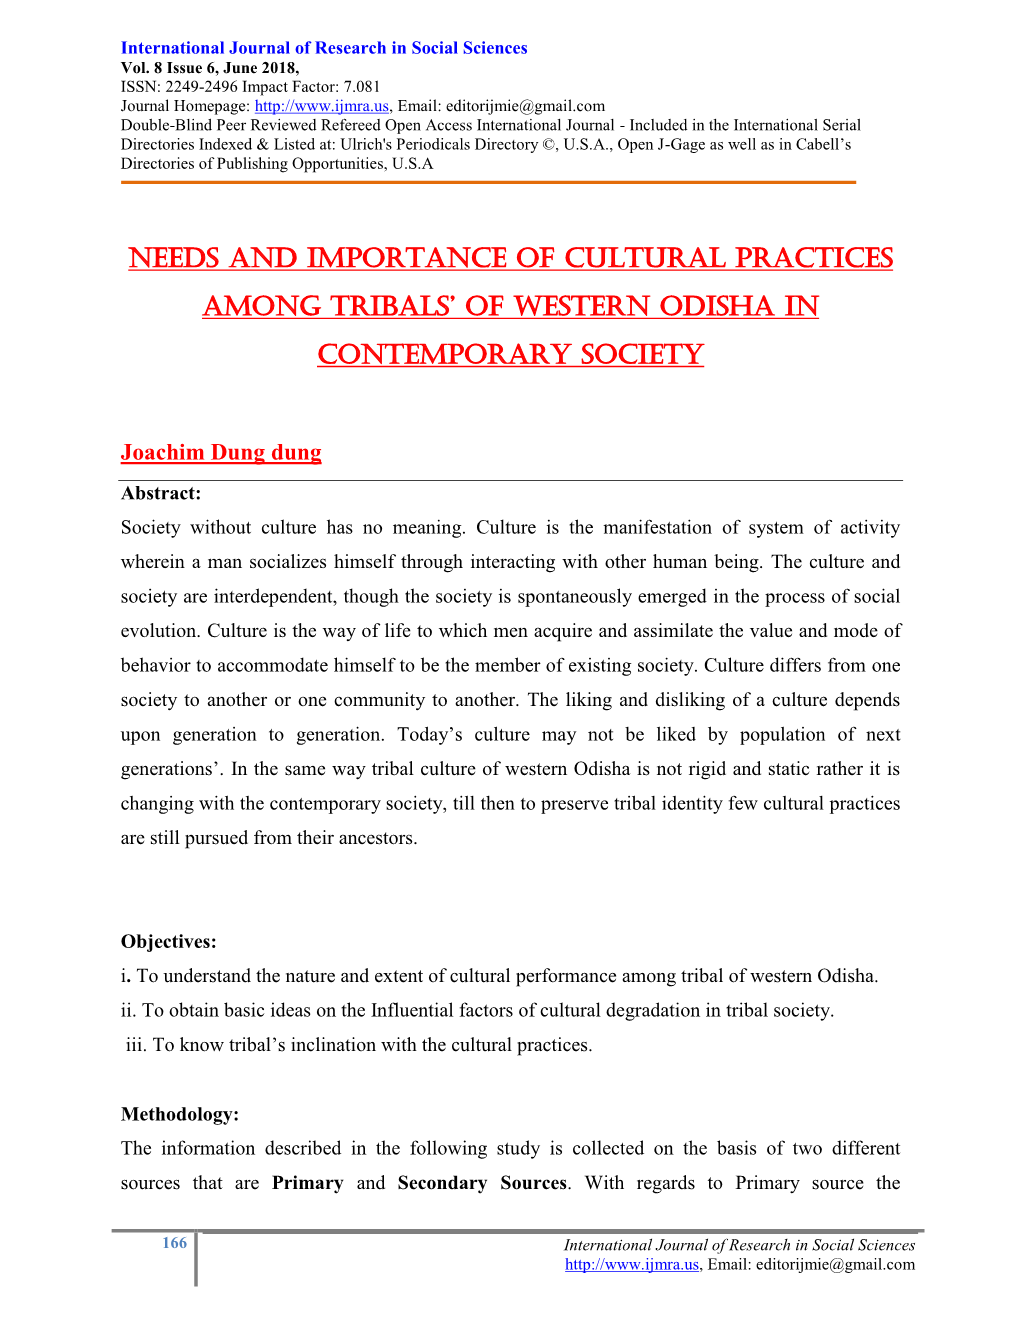 Needs and Importance of Cultural Practices Among Tribals' of Western Odisha in Contemporary Society